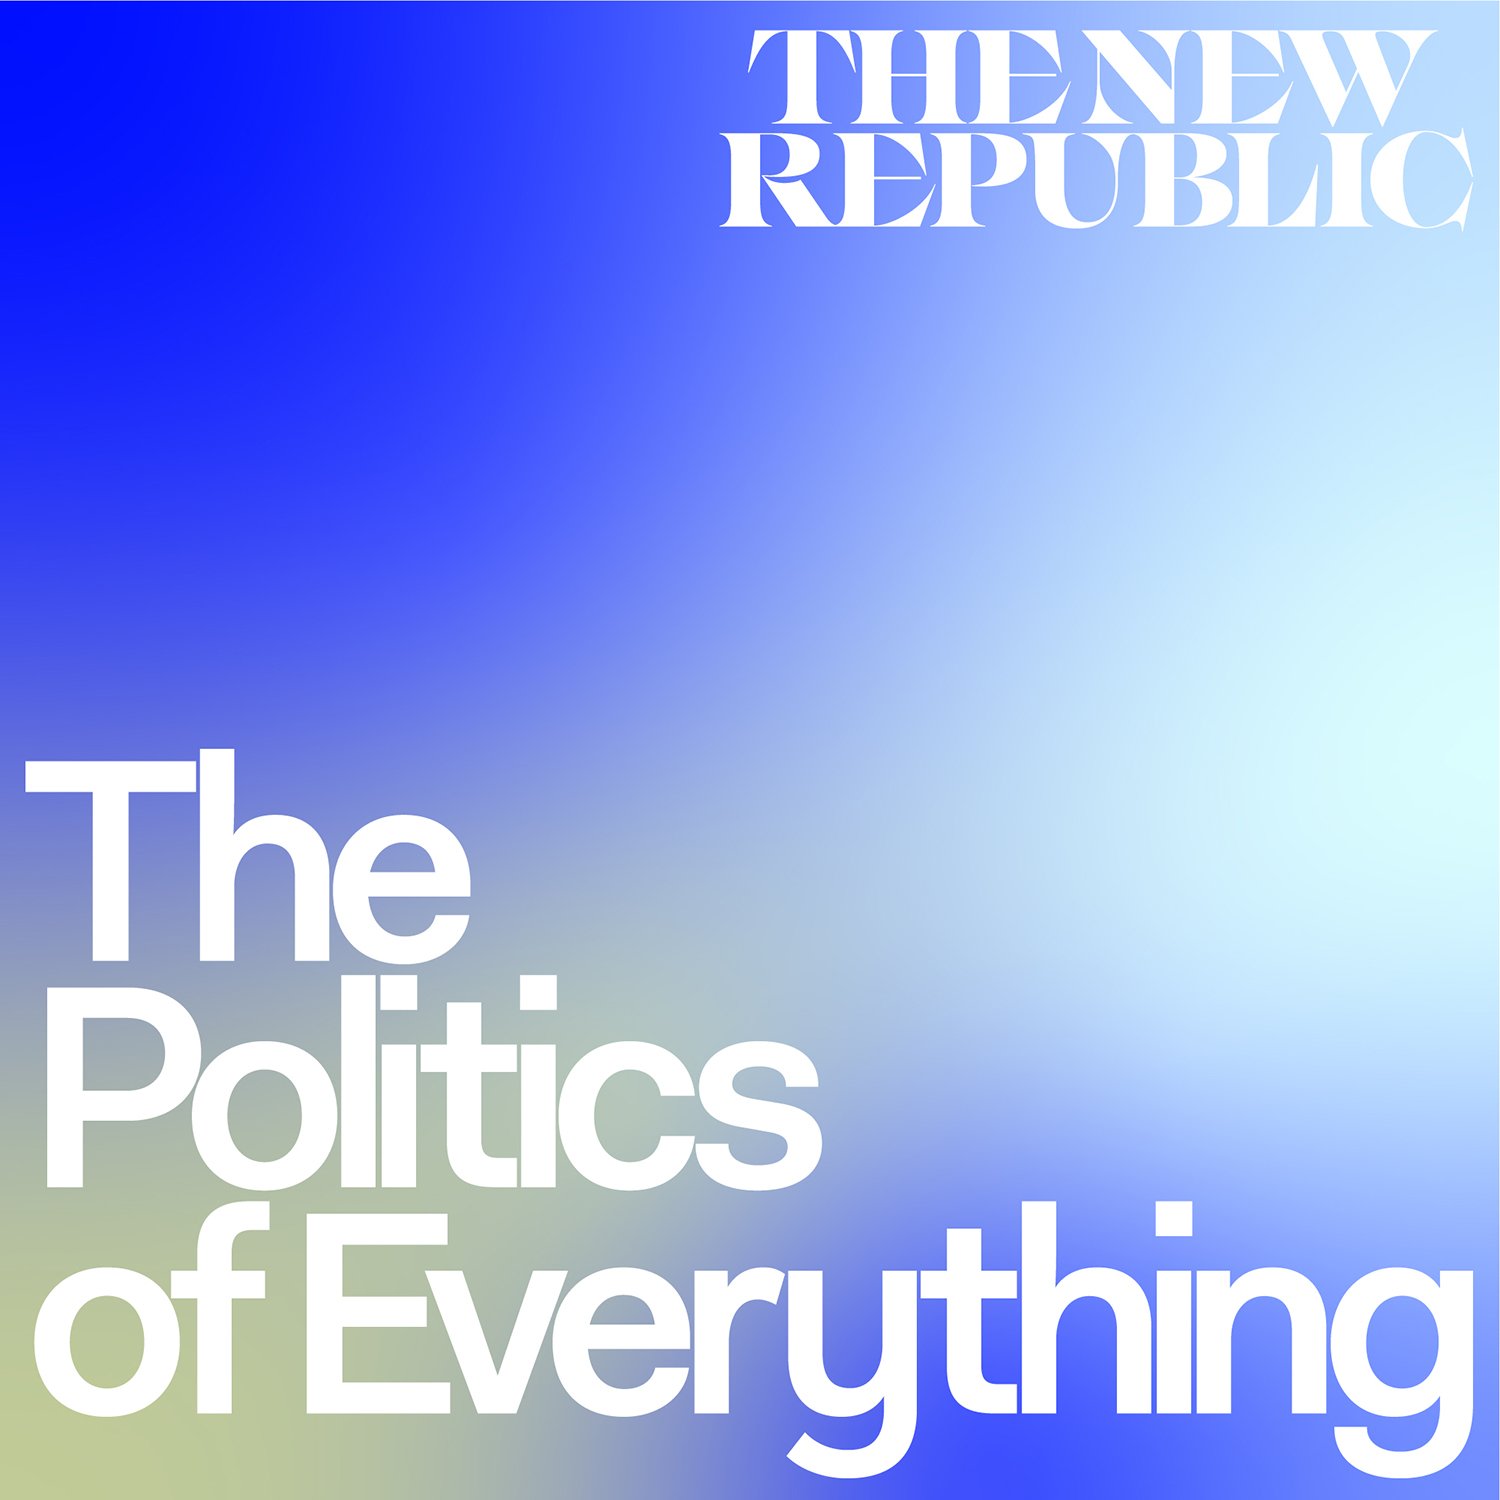 The-New-Republic’s-‘The-politics-of-everything’.-talkhouse-podcast-prodiction.jpg